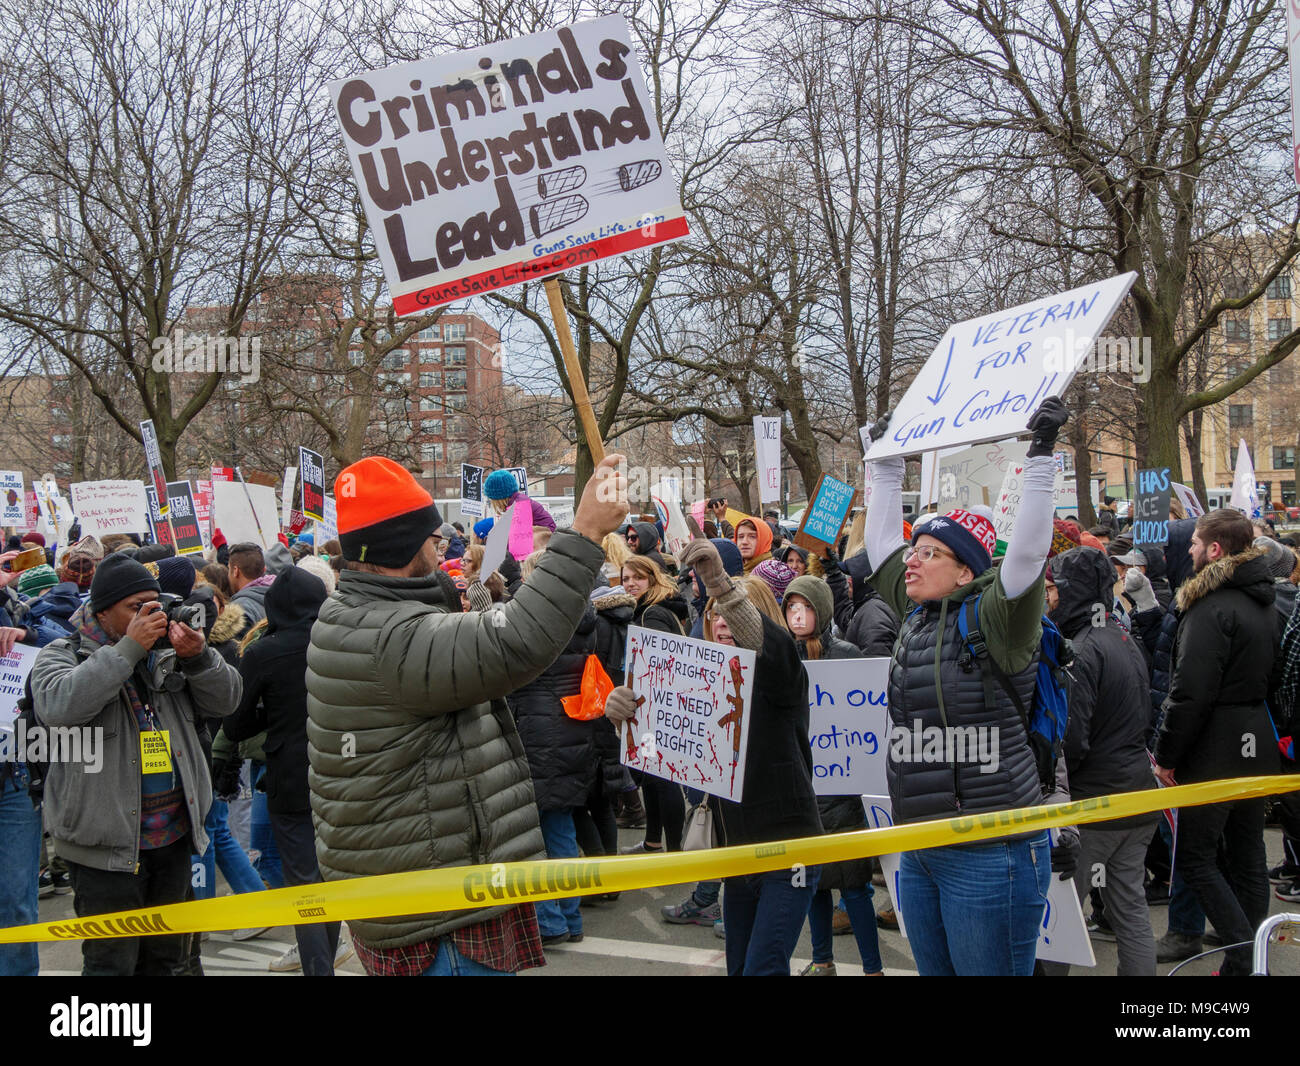 Chicago, Illinois, USA. 24th March 2018. Gun regulation advocates confront a pro-gun counter protester at today's March for Our Lives protest in this Midwestern city. Thousands of gun regulation protestors marched in support of increased gun regulation in the USA. Stock Photo